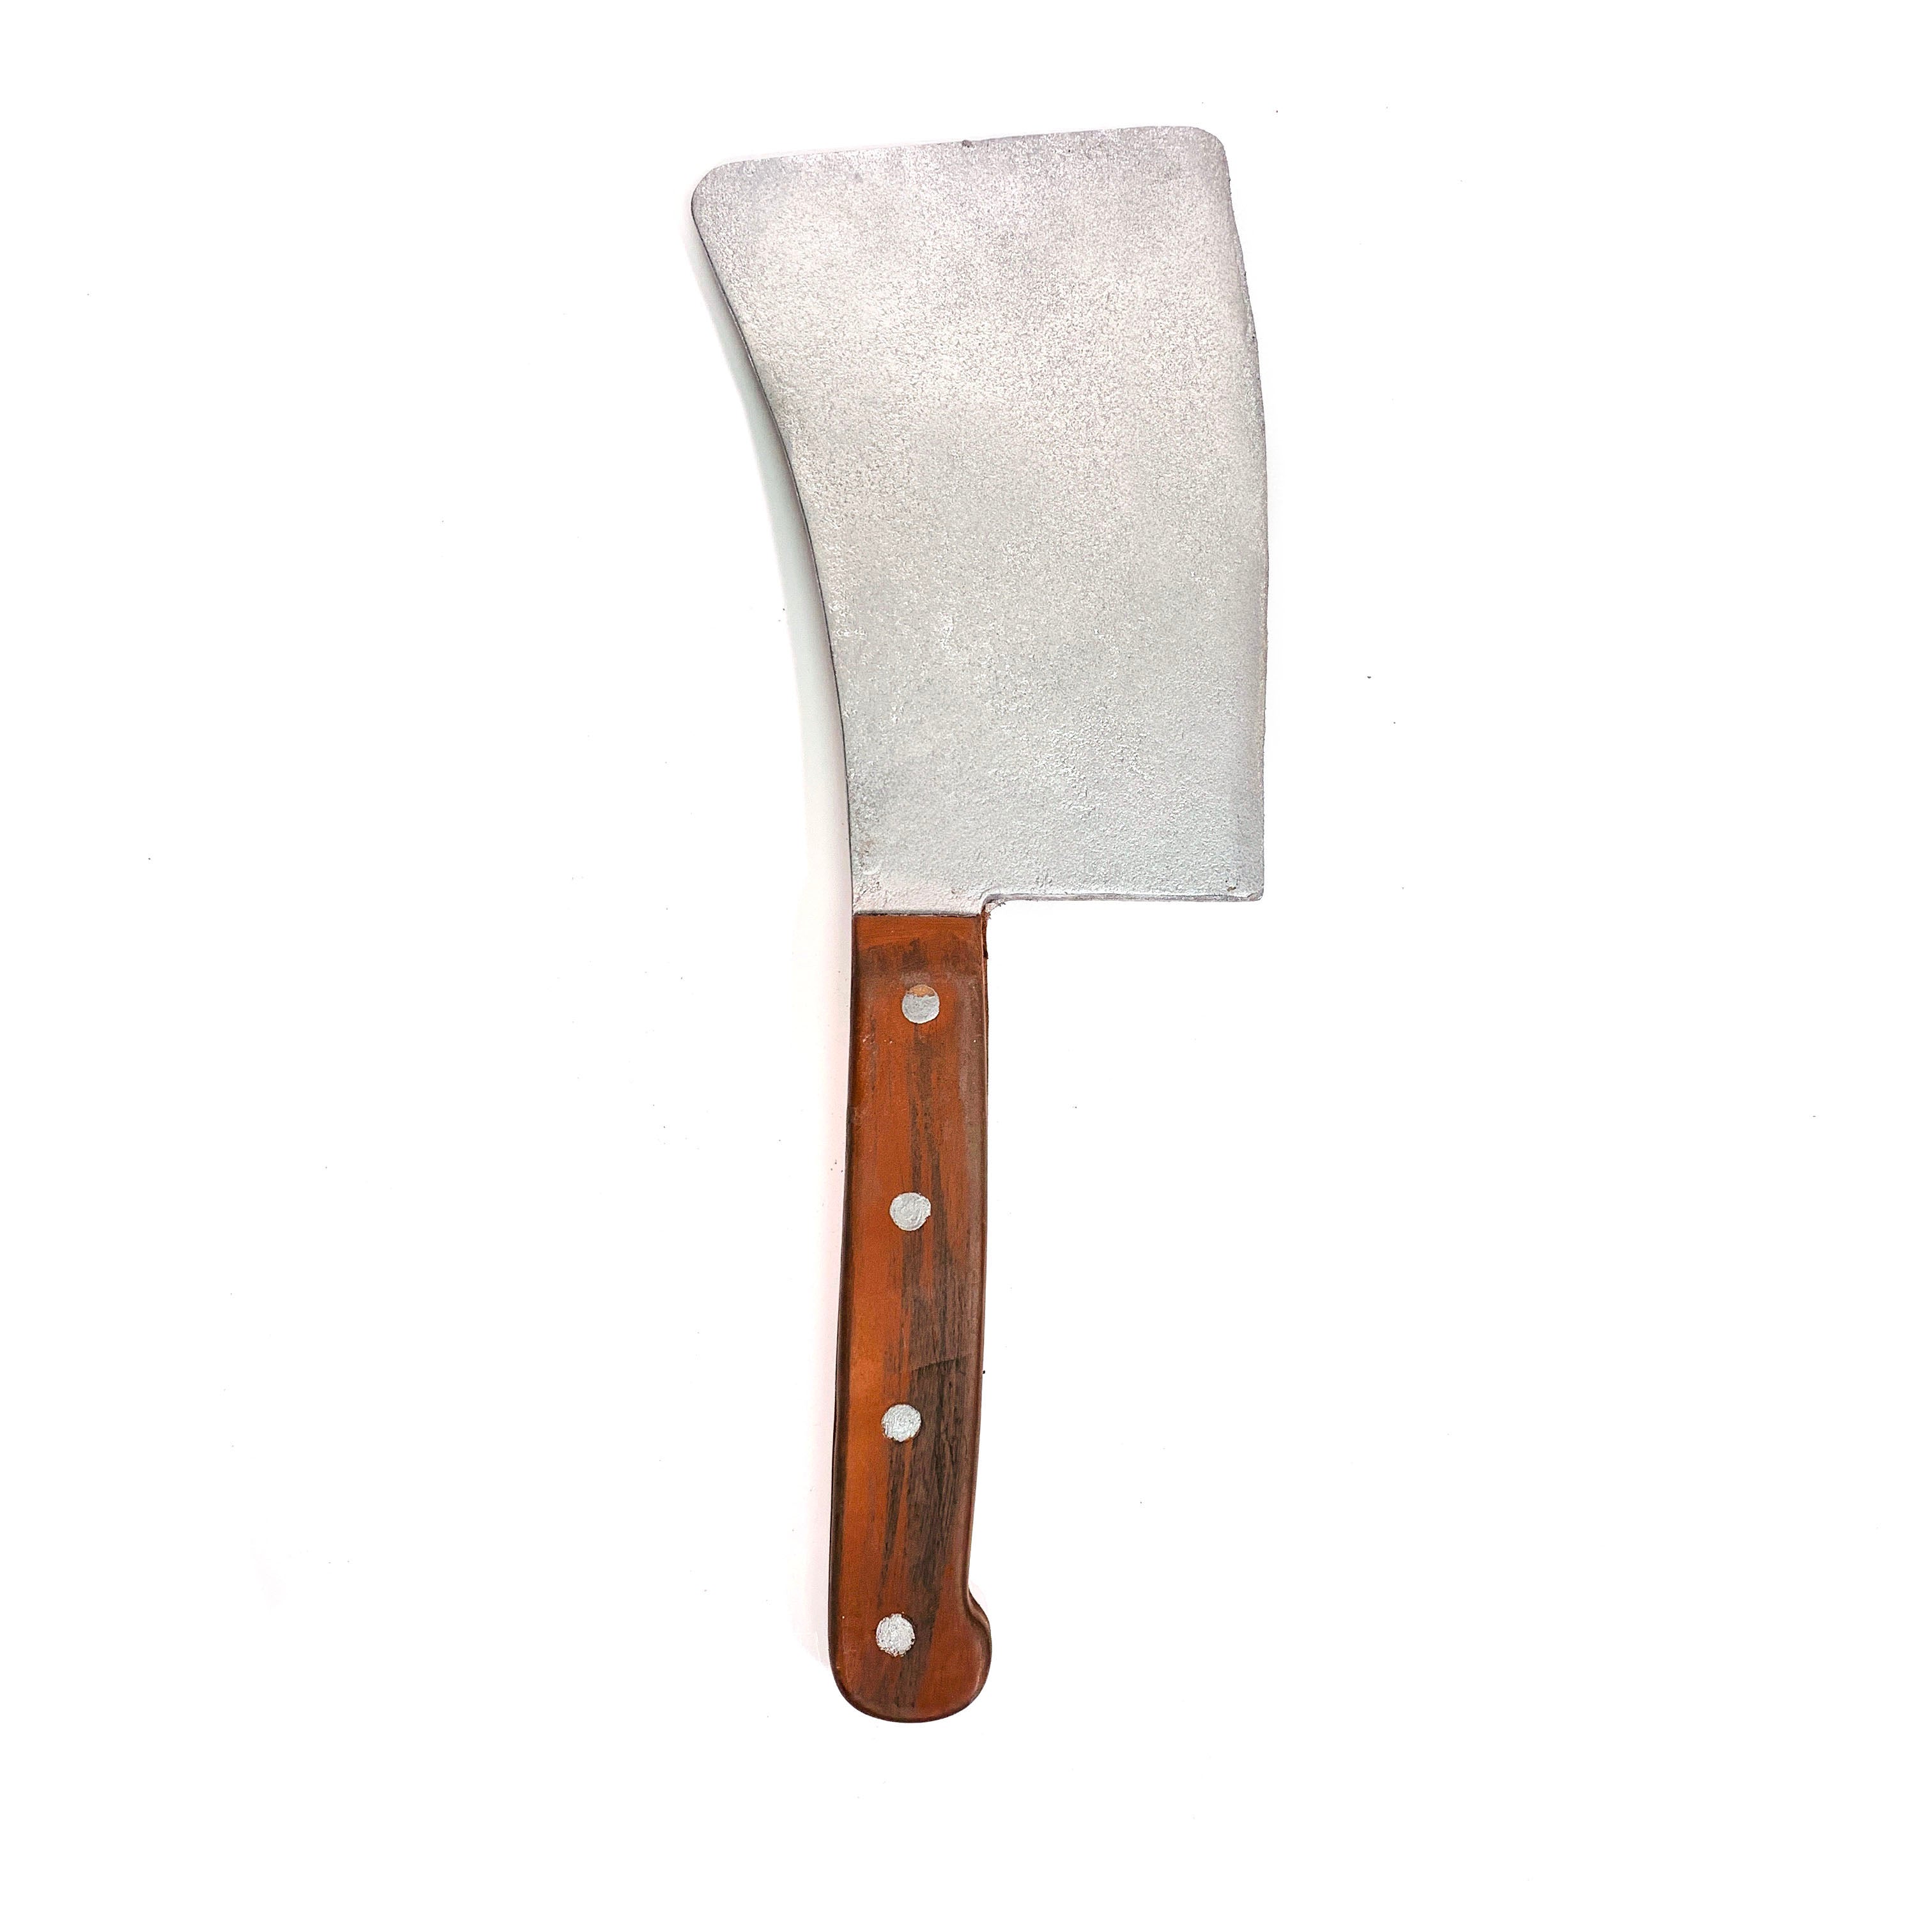 Extra Large Foam Rubber Butcher's Cleaver - NEW - Silver Blade with Brown Handle